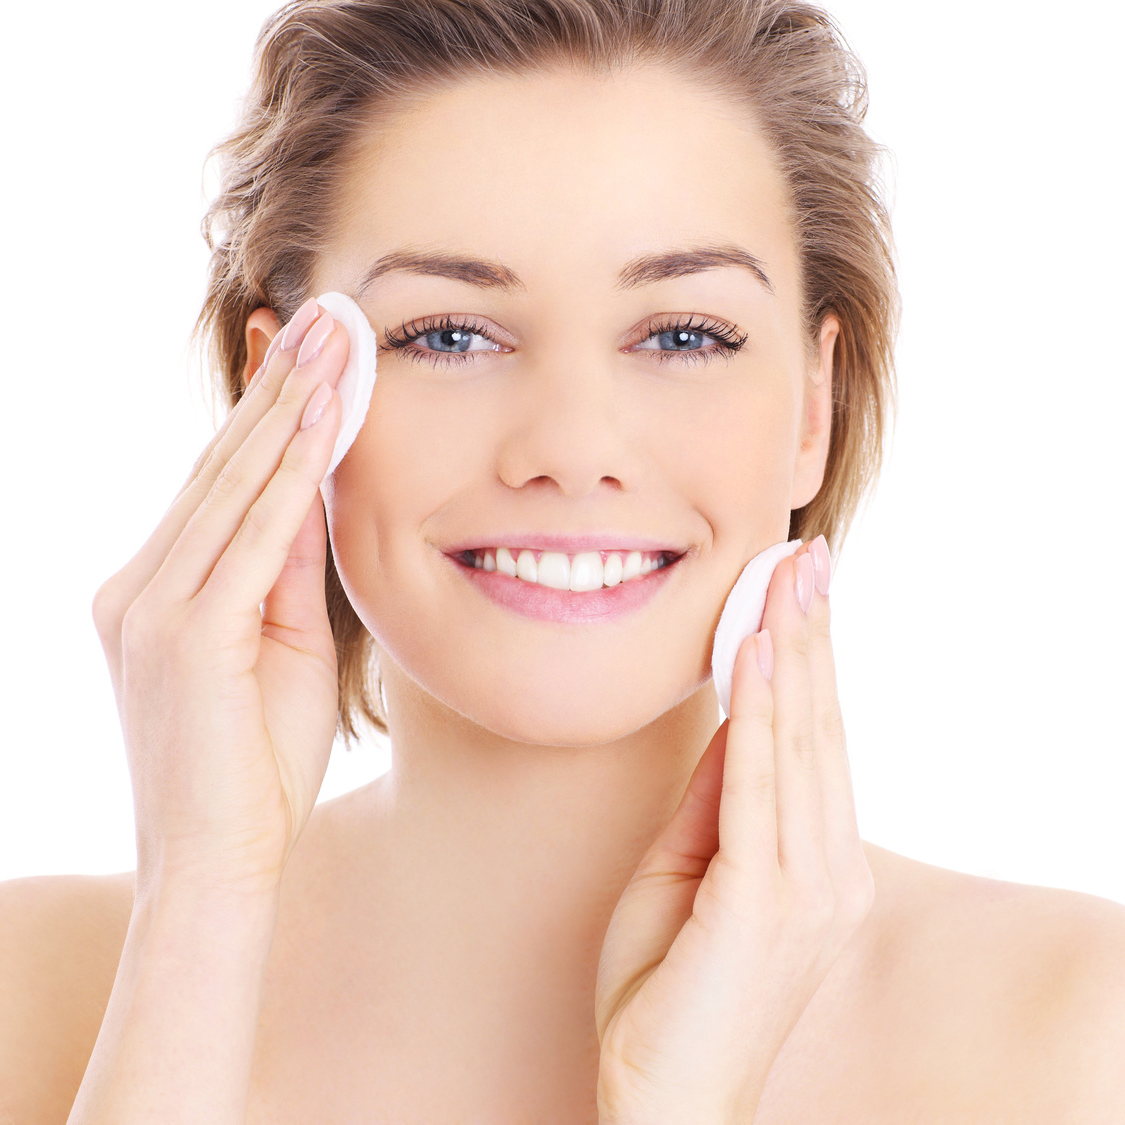 Store-brand facials can cause acne